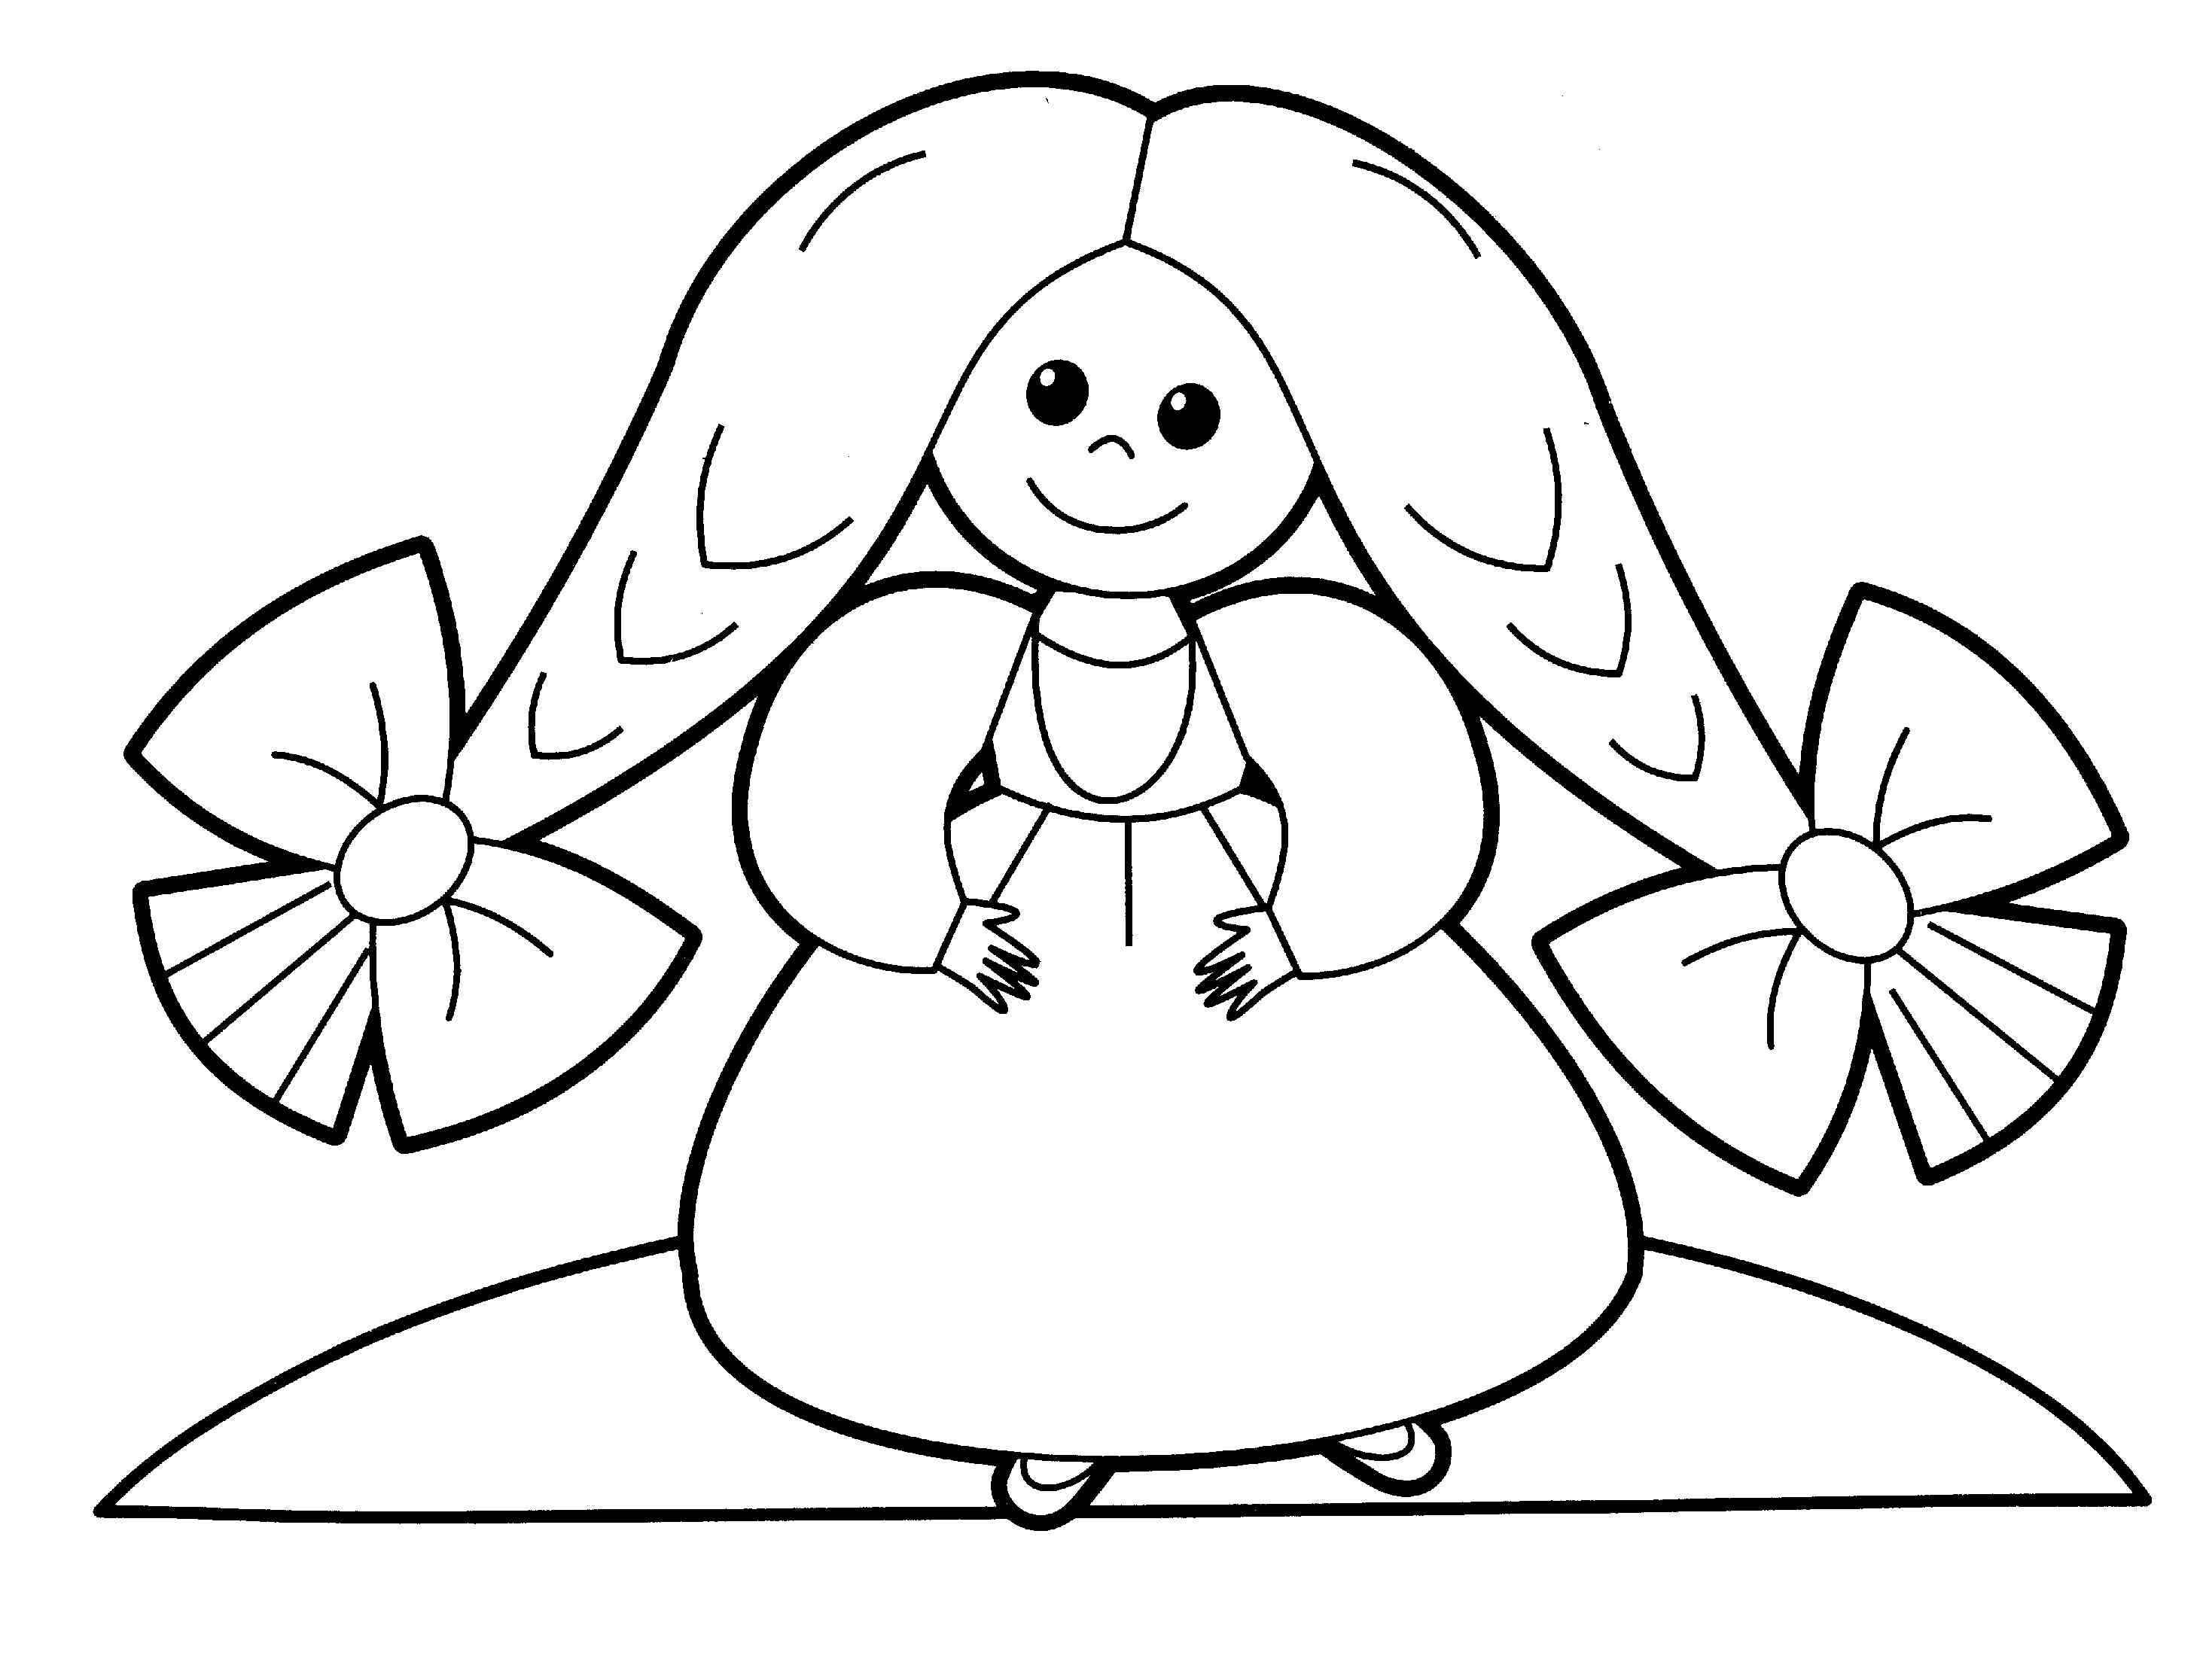 Little people coloring pages for babies 36 / Little people / Kids ...